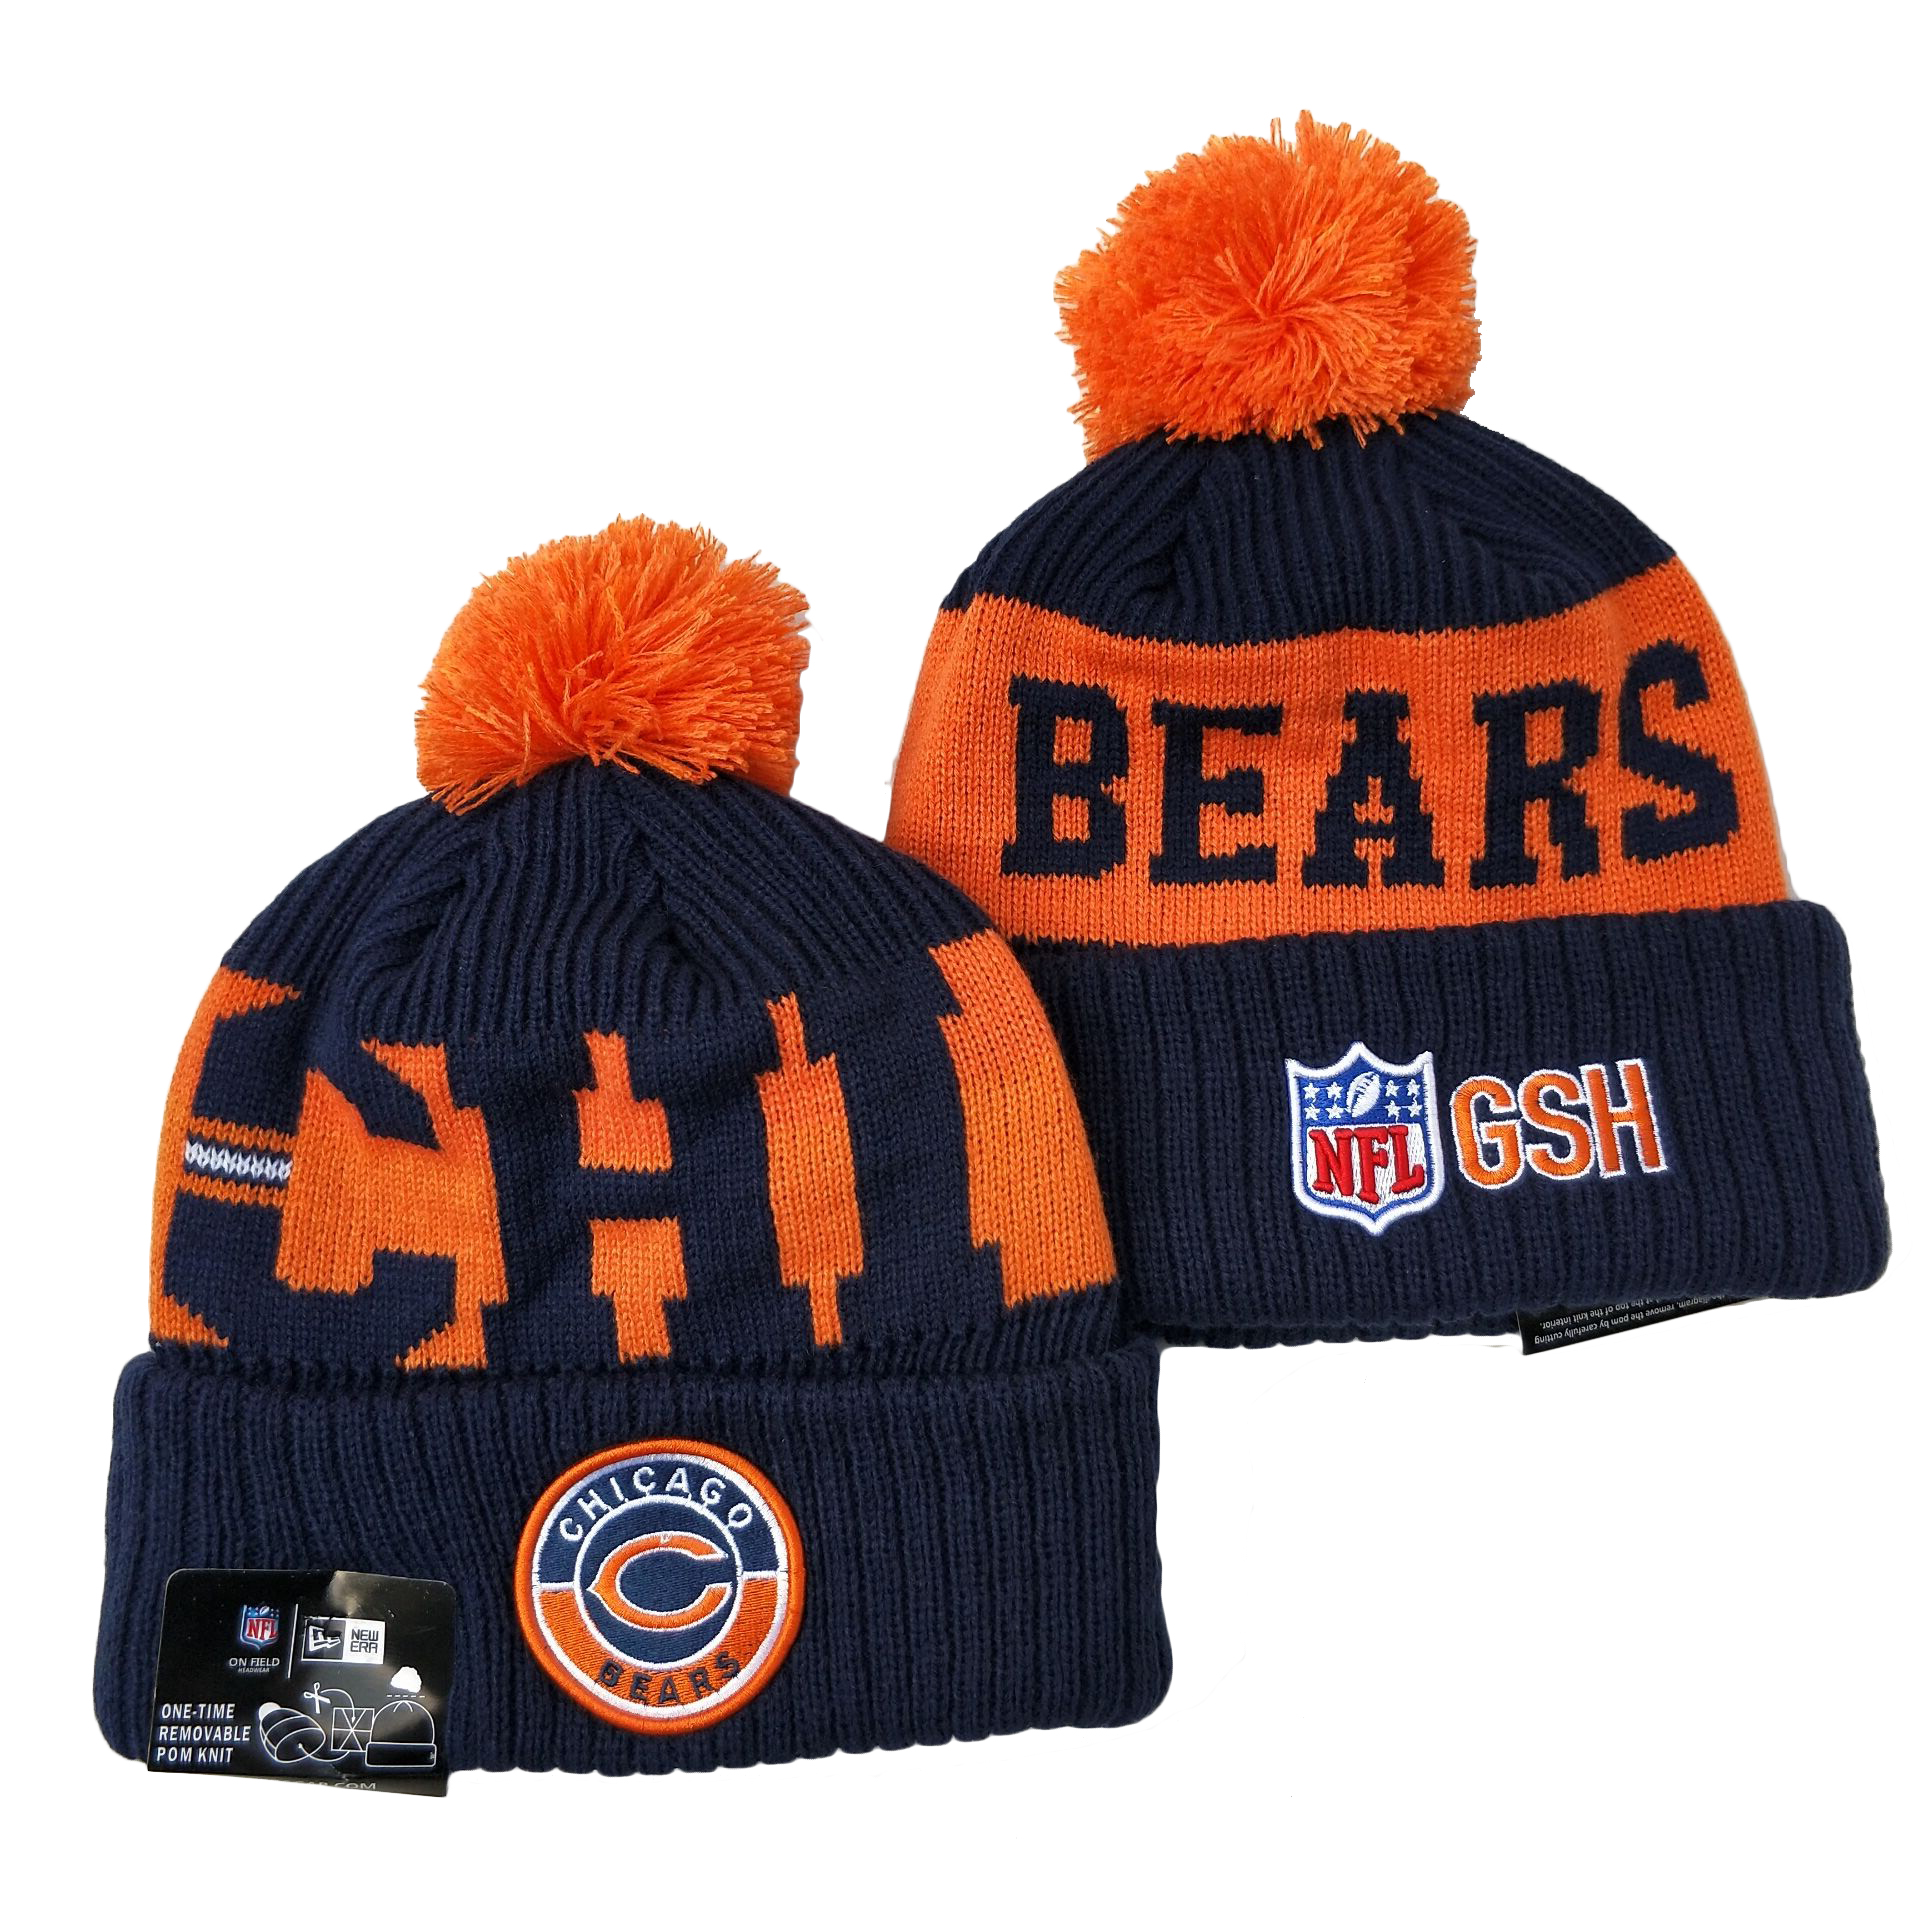 Chicago Bears Knit Hats 026